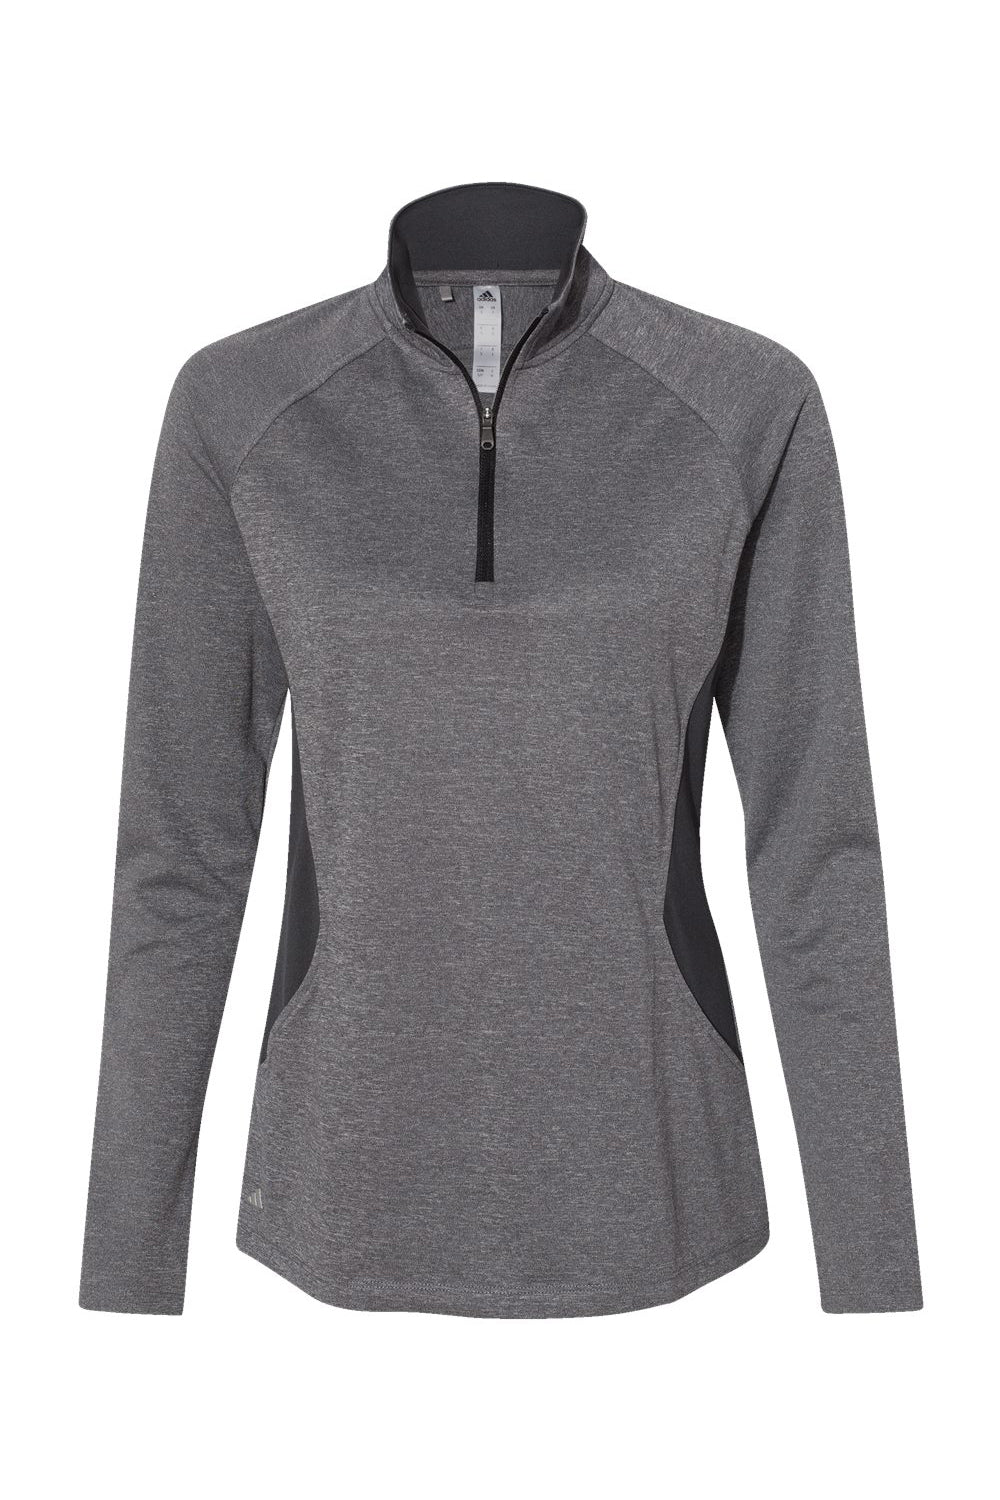 Adidas A281 Womens 1/4 Zip Pullover Heather Black/Carbon Grey Flat Front